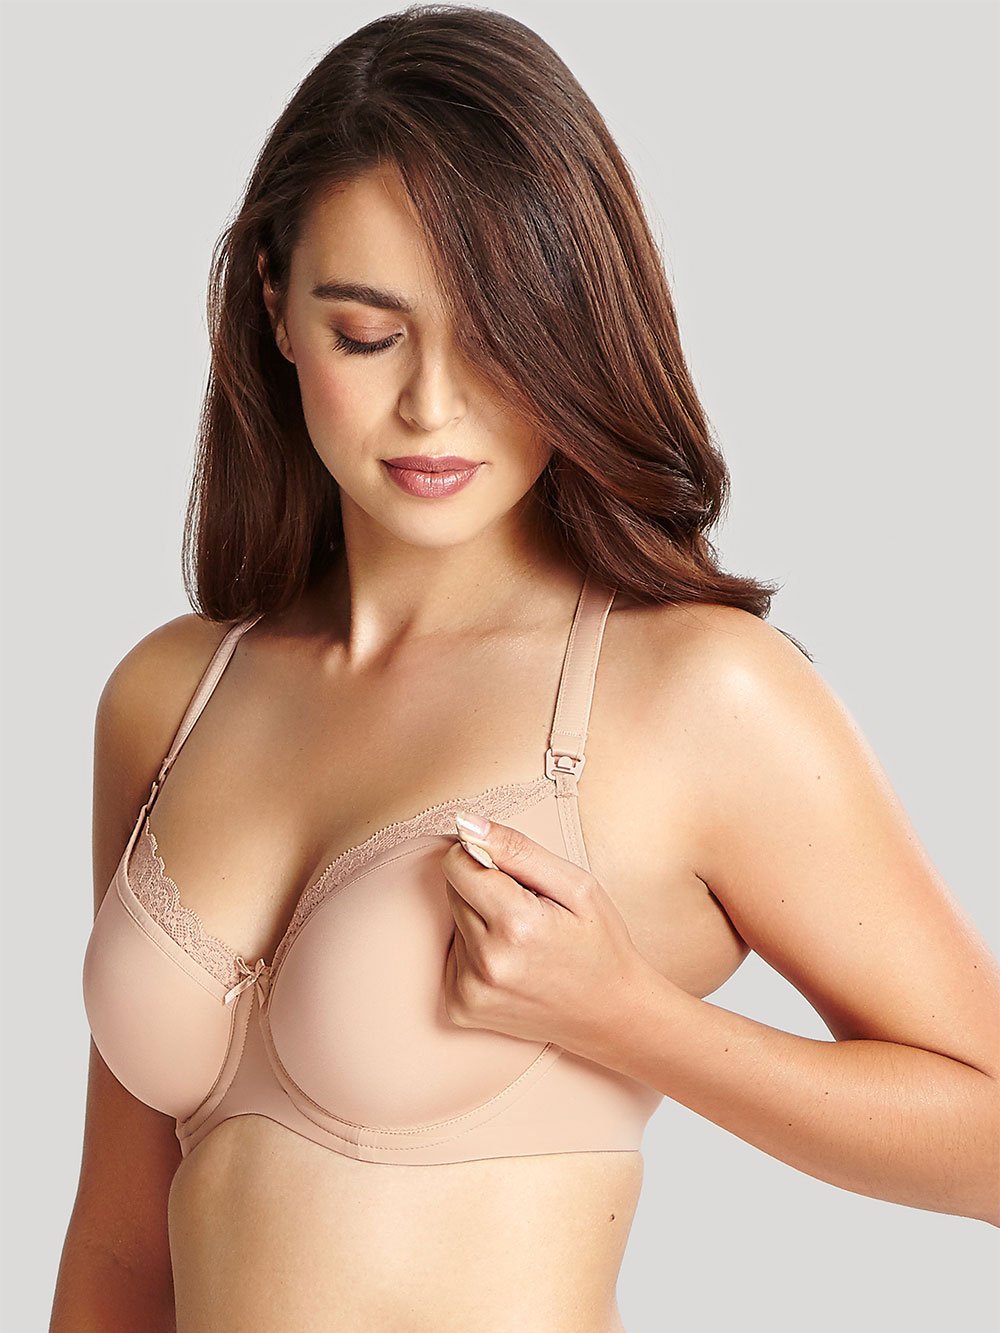 D Cup Bra: Bras for D Cup Boobs and Breast Size 标签语法 - HauteFlair